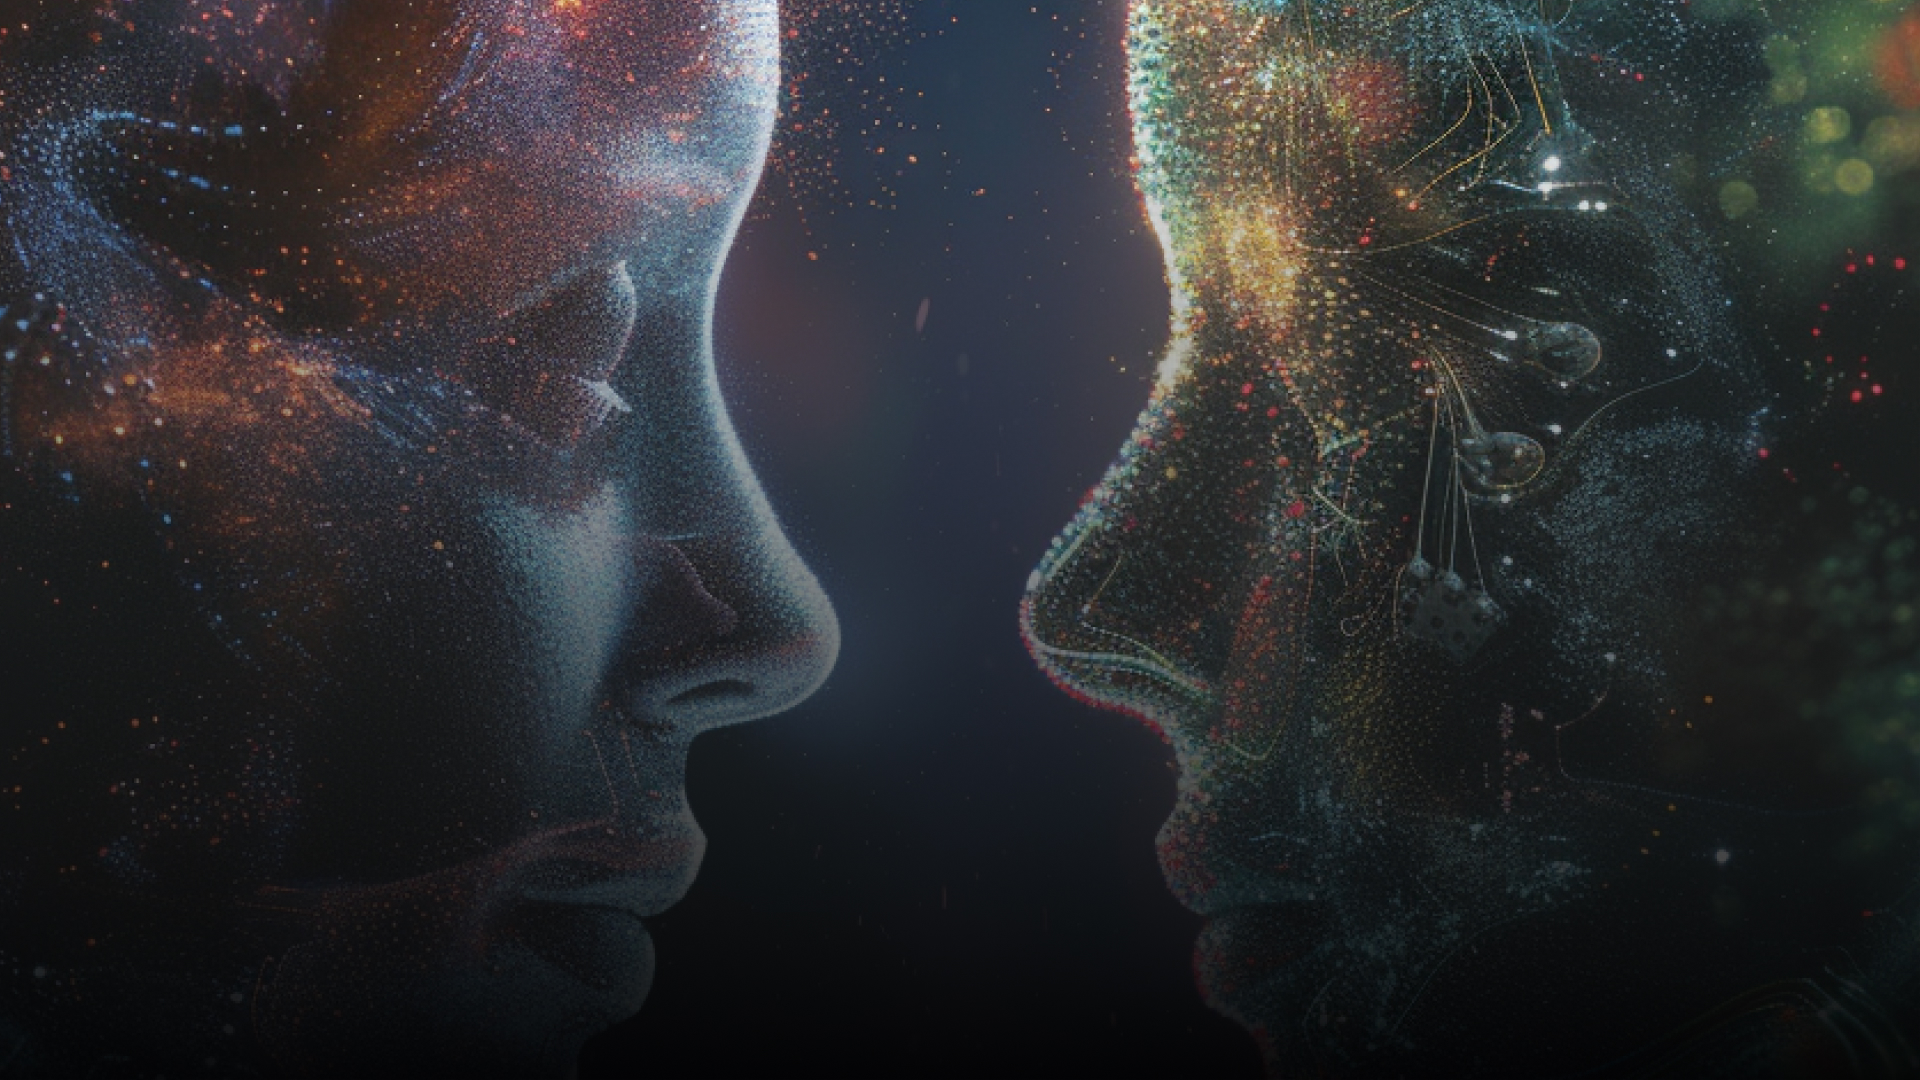 Machine Learning vs. Deep Learning
What’s the Difference?